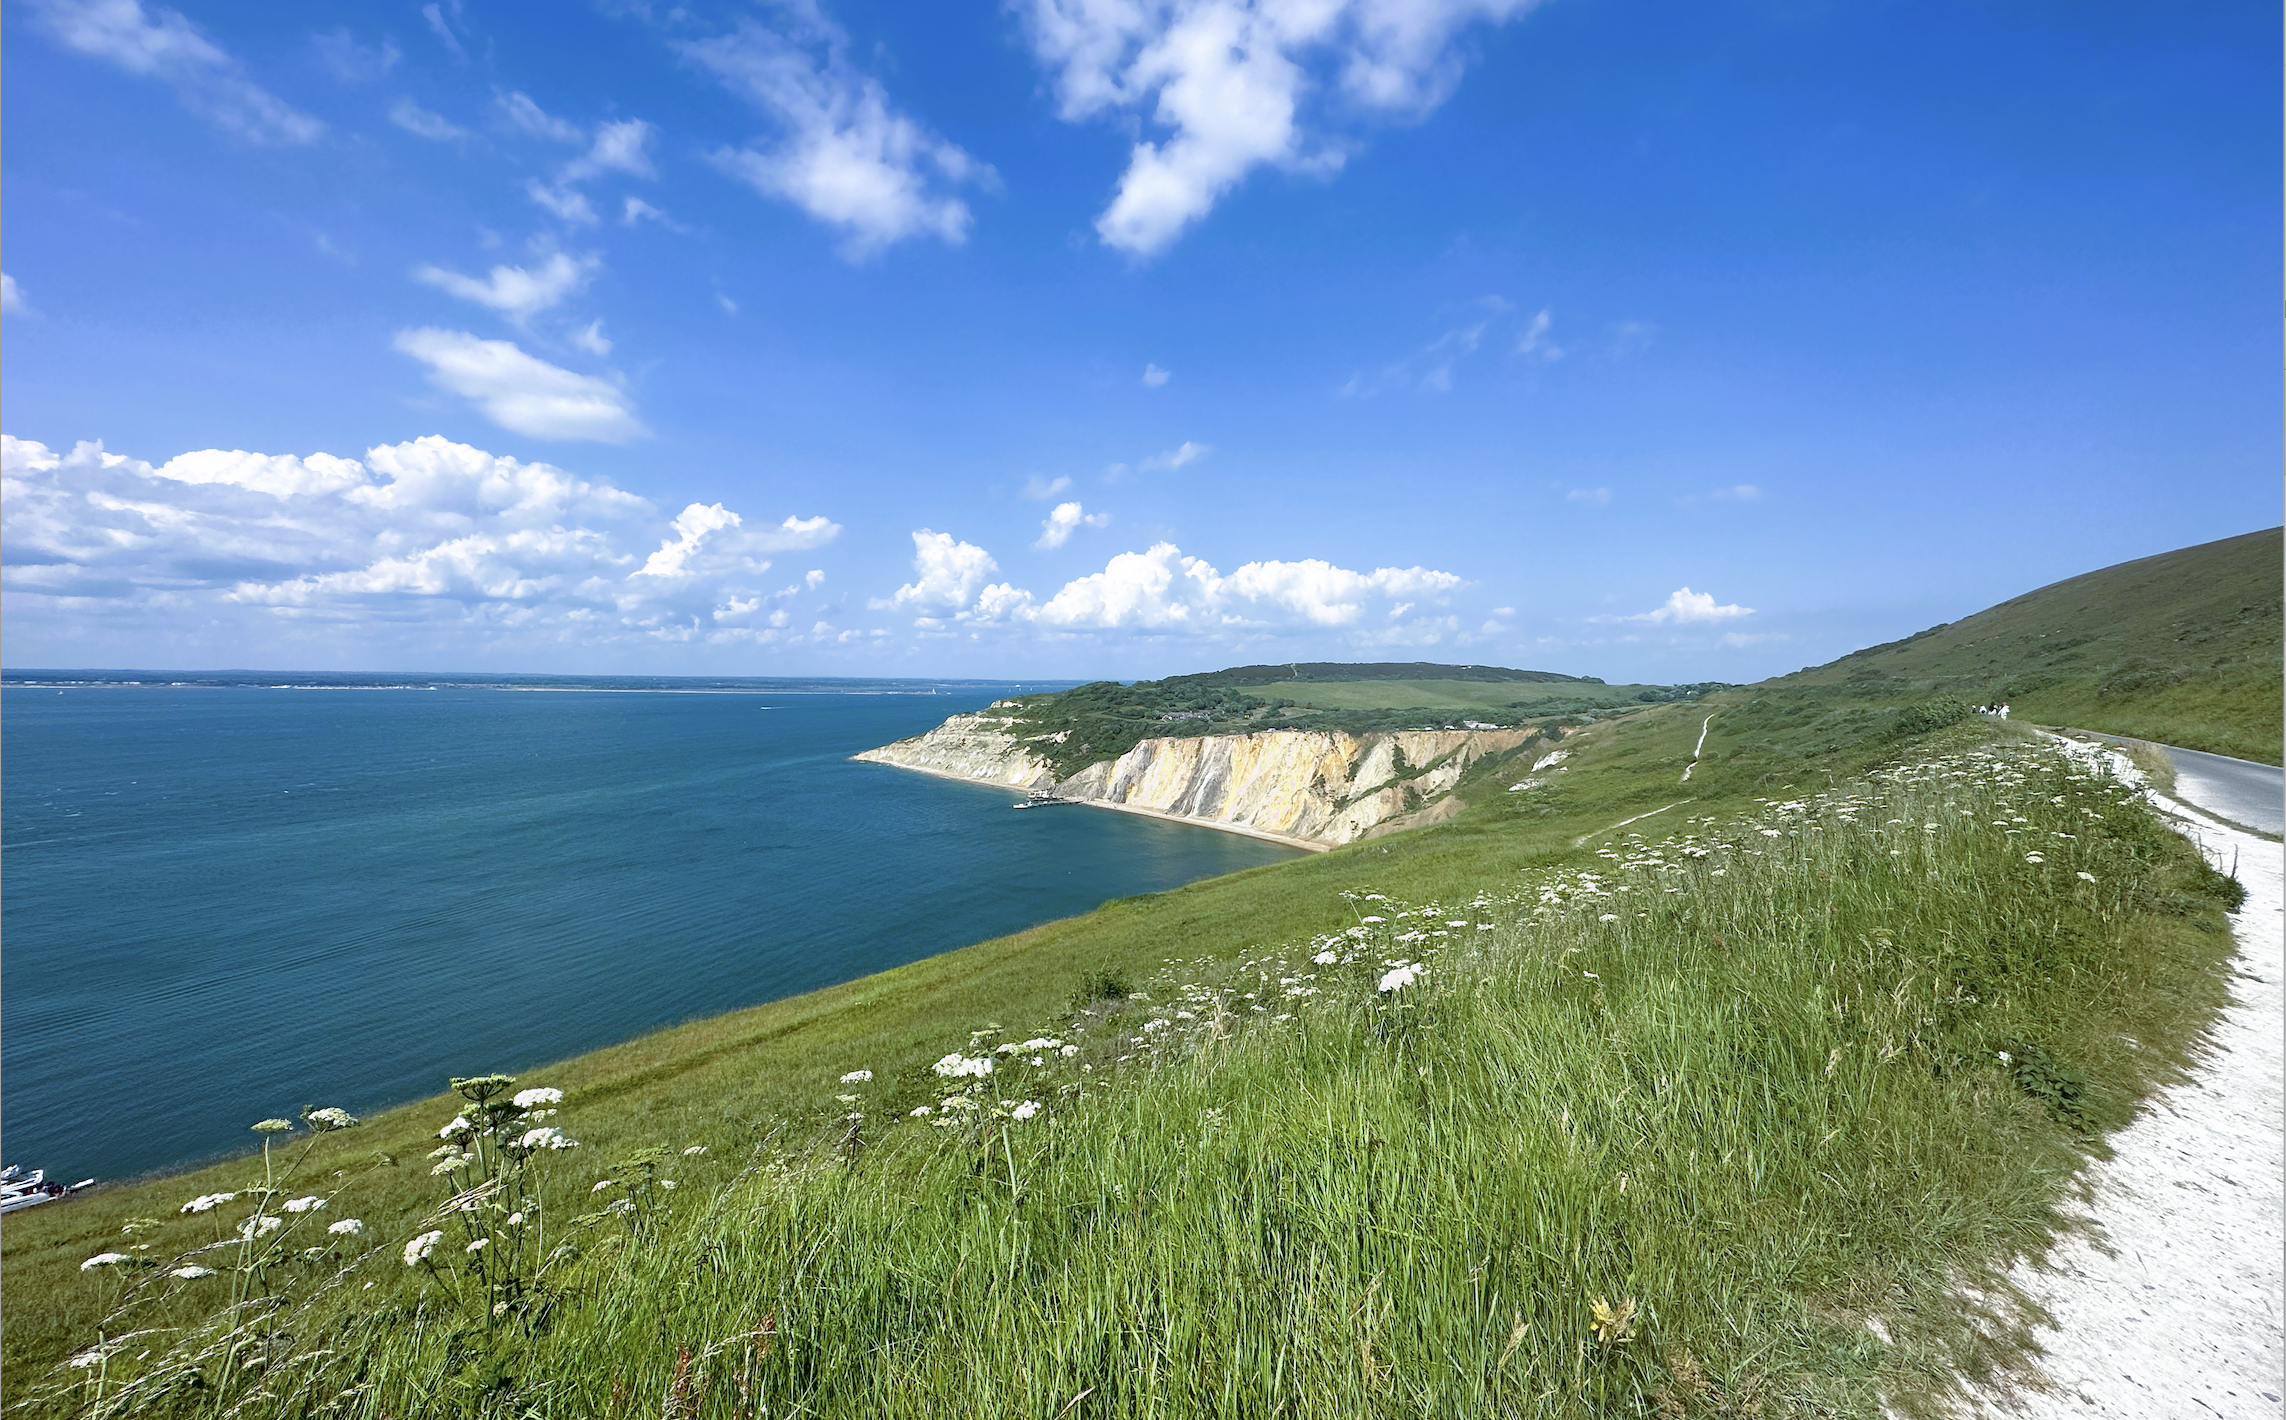 Scenic view of the Isle of Wight from Alum Bay on a sunny day